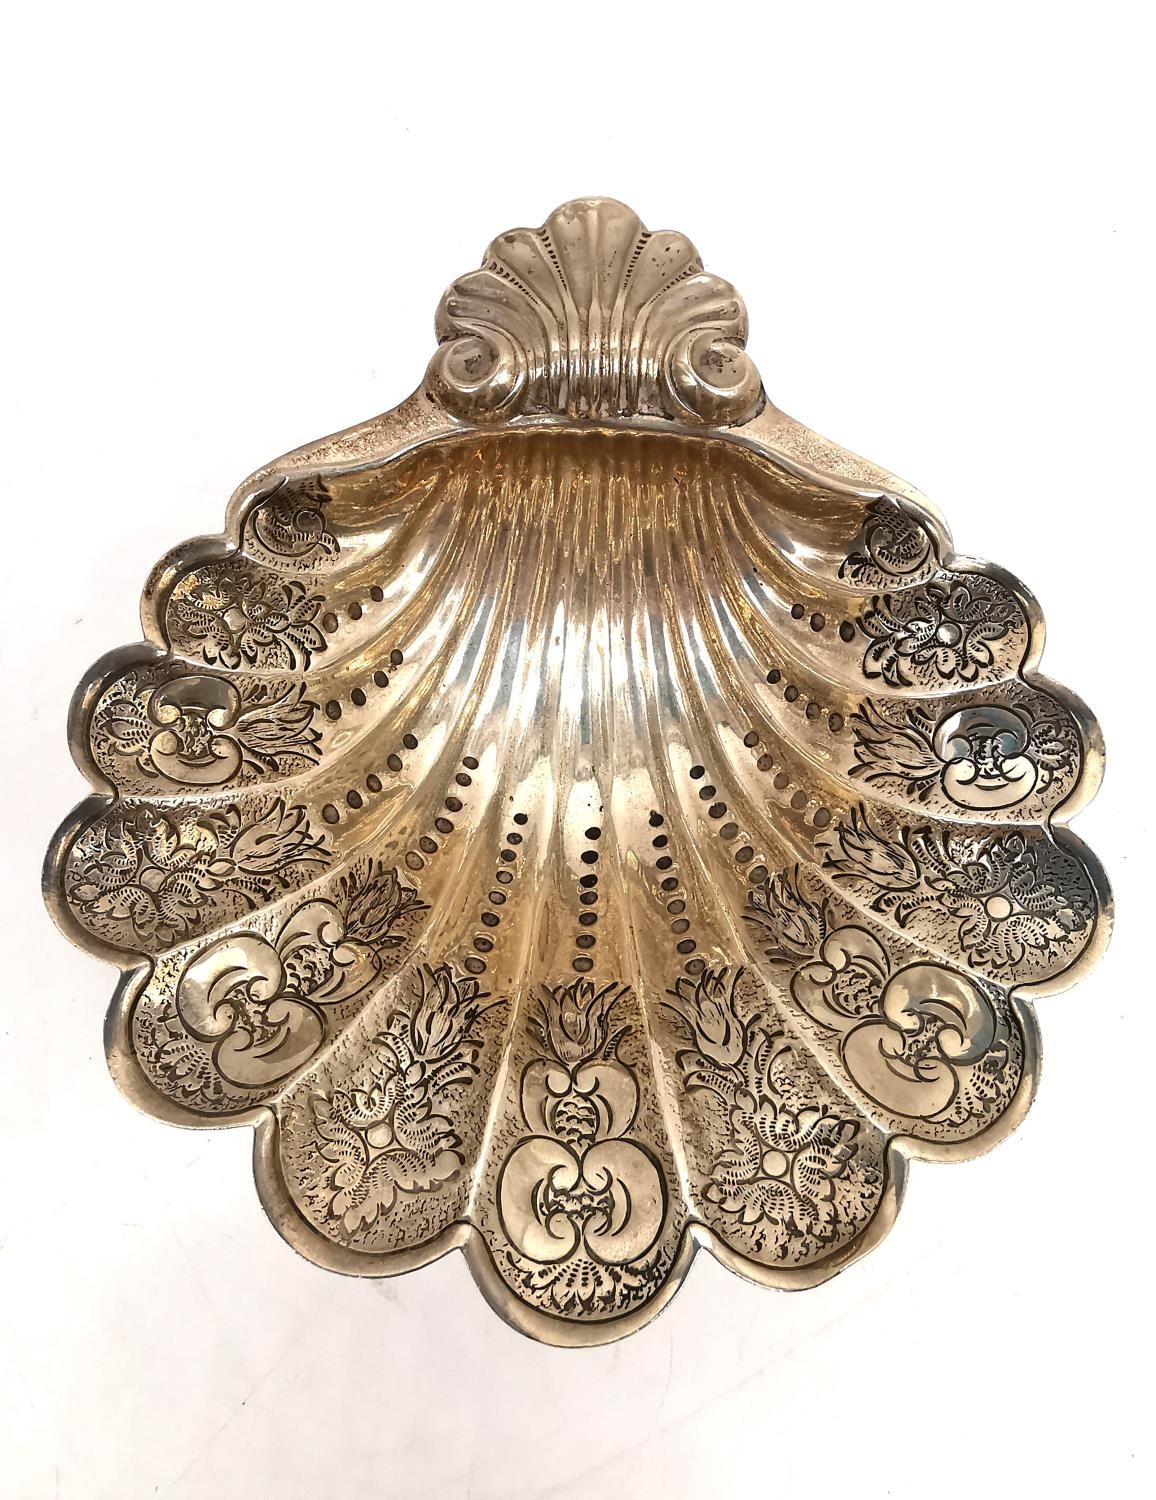 A vintage silver engraved clam shell form trinket dish by J B Chatterley & Sons Ltd. Engraved with a - Image 4 of 6